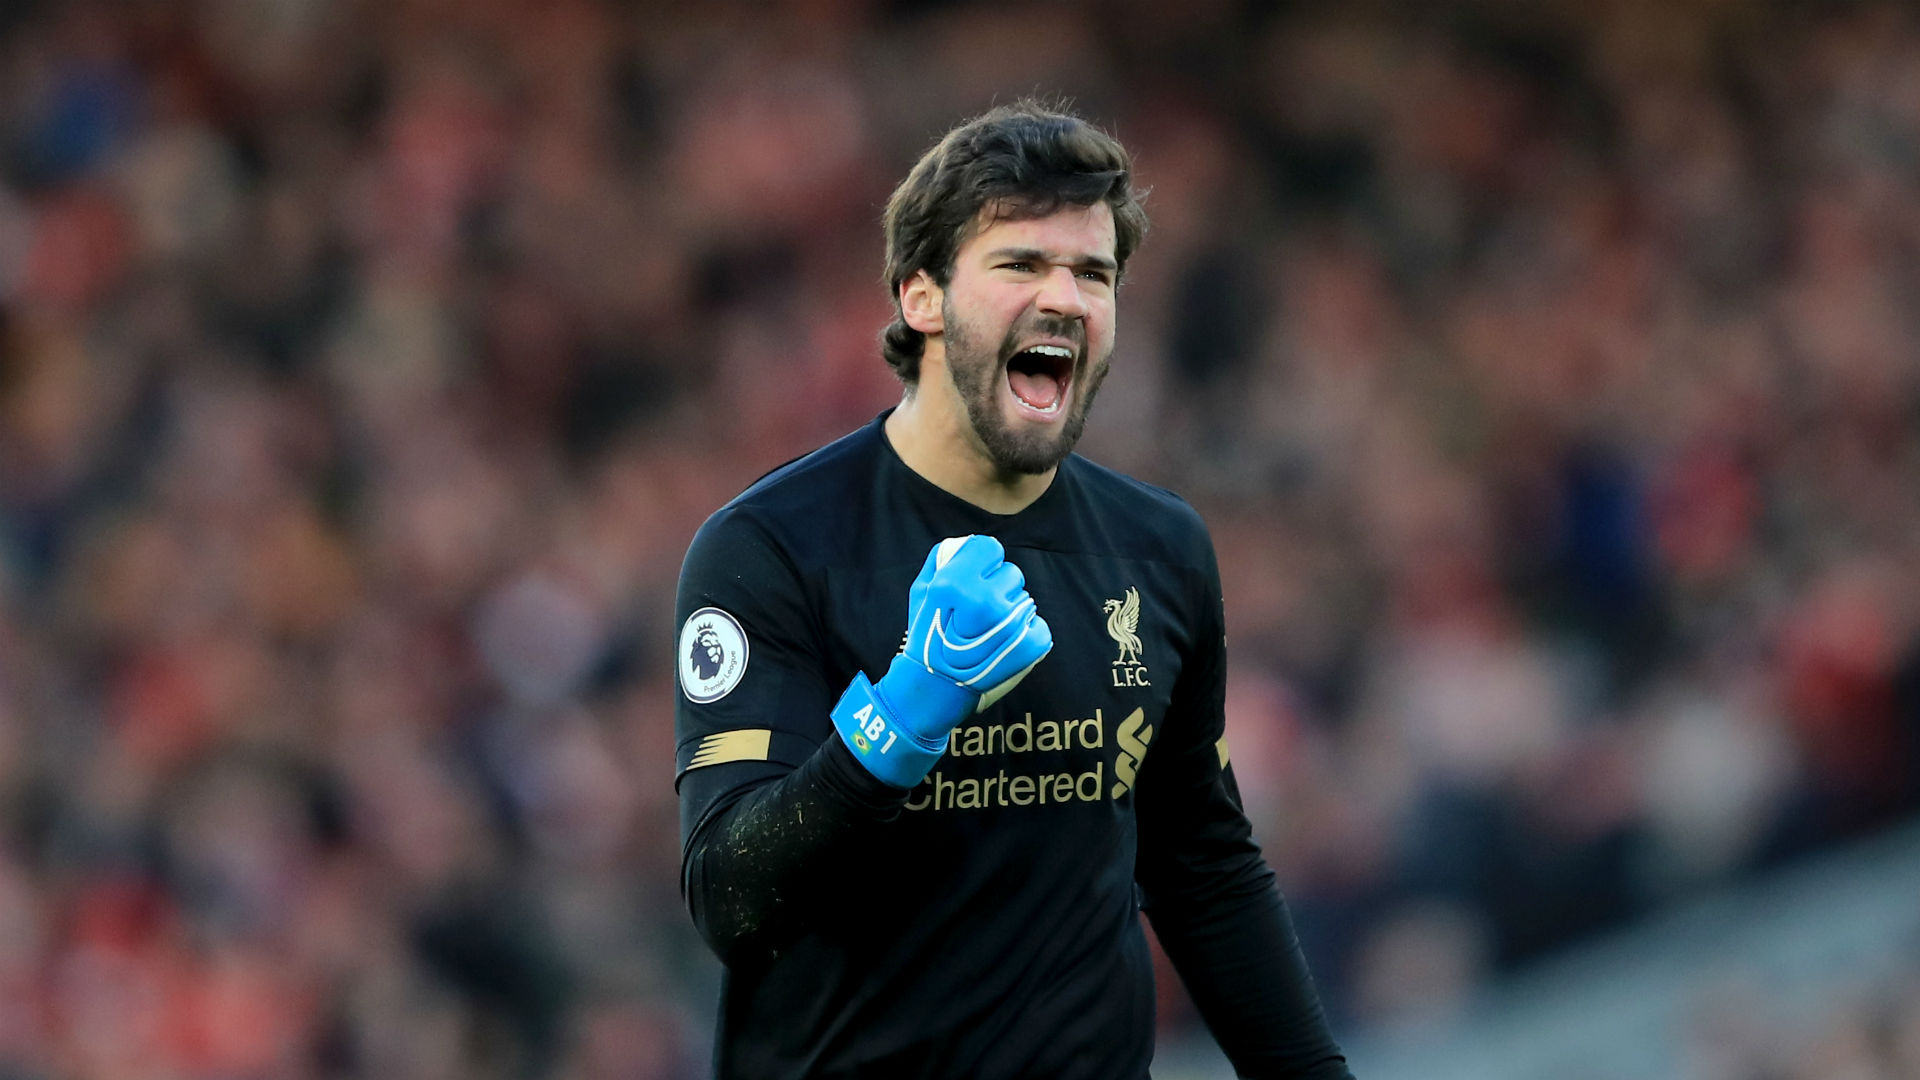 According to the Stats Perform Goalkeeper Index, Alisson is expected to prevent 0.58 more goals per game than the league average.